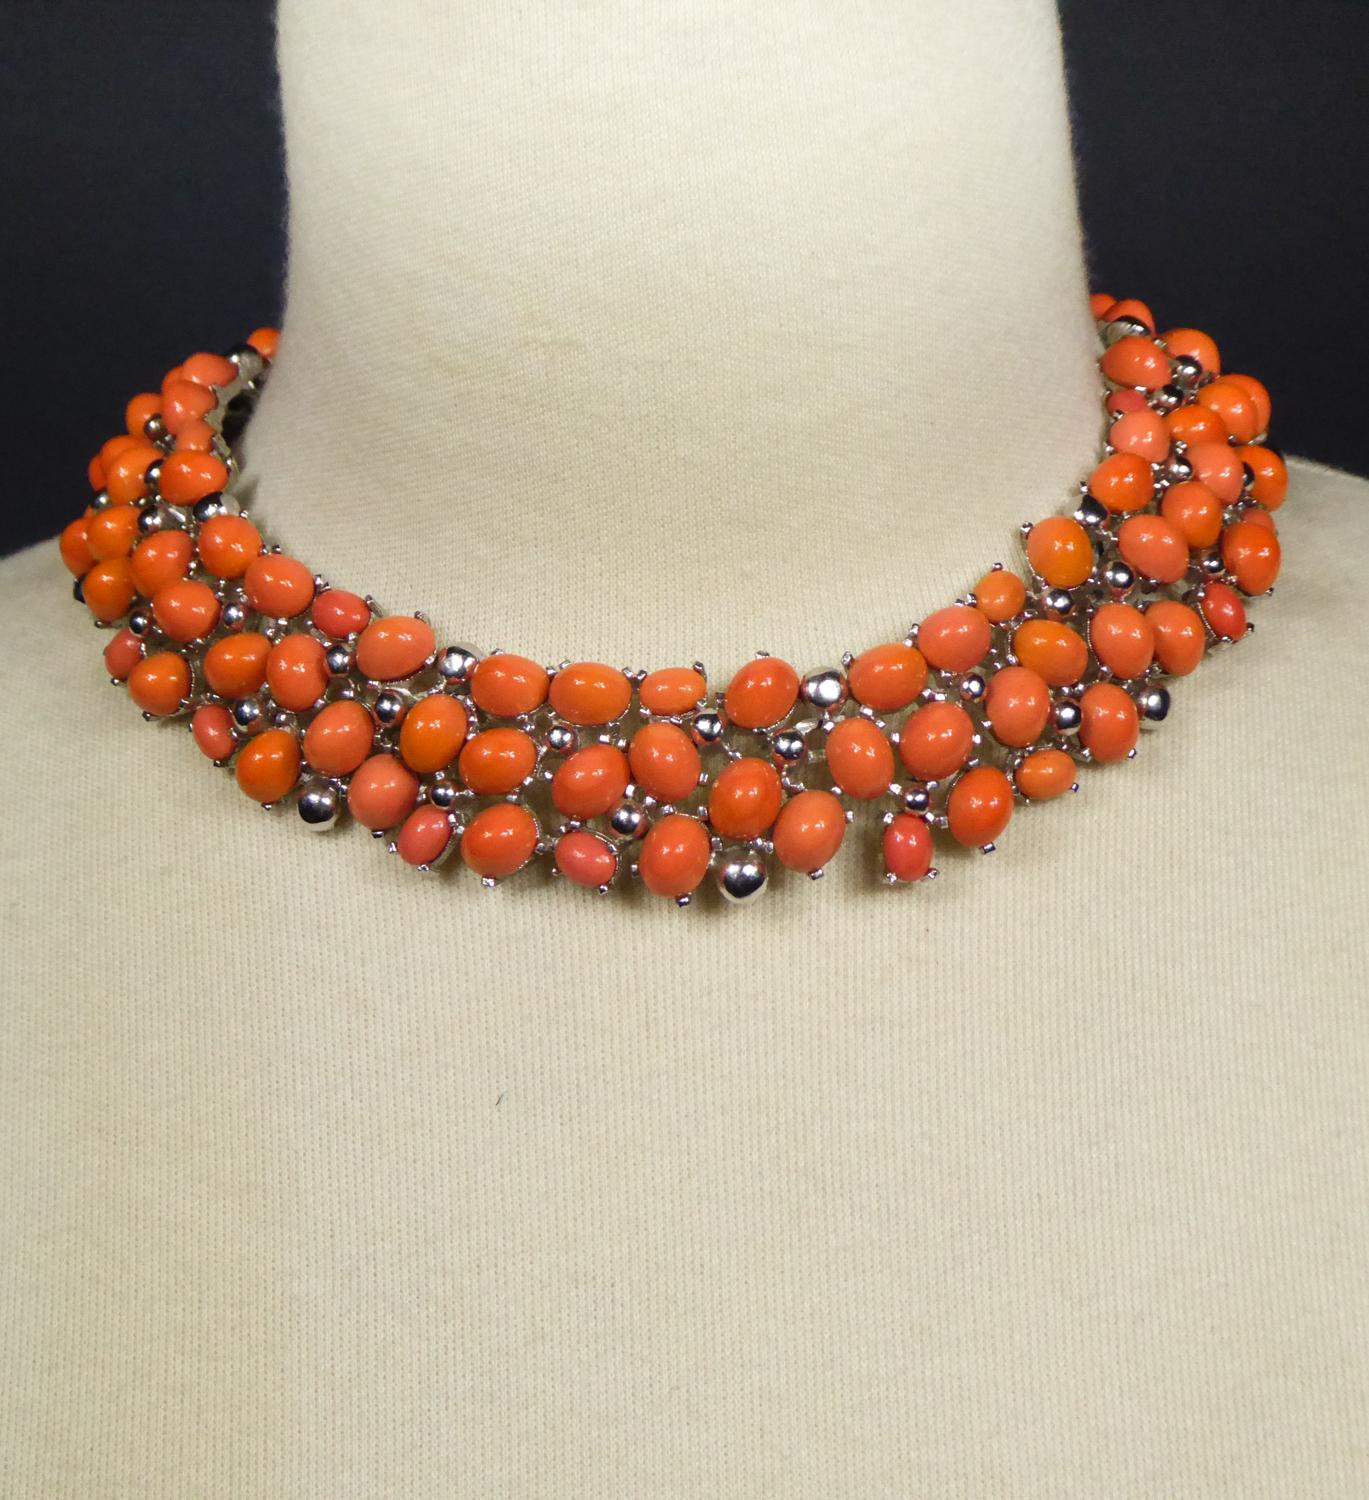 A Carven Haute Couture Necklace in glass Beads Circa 1960/1970 6